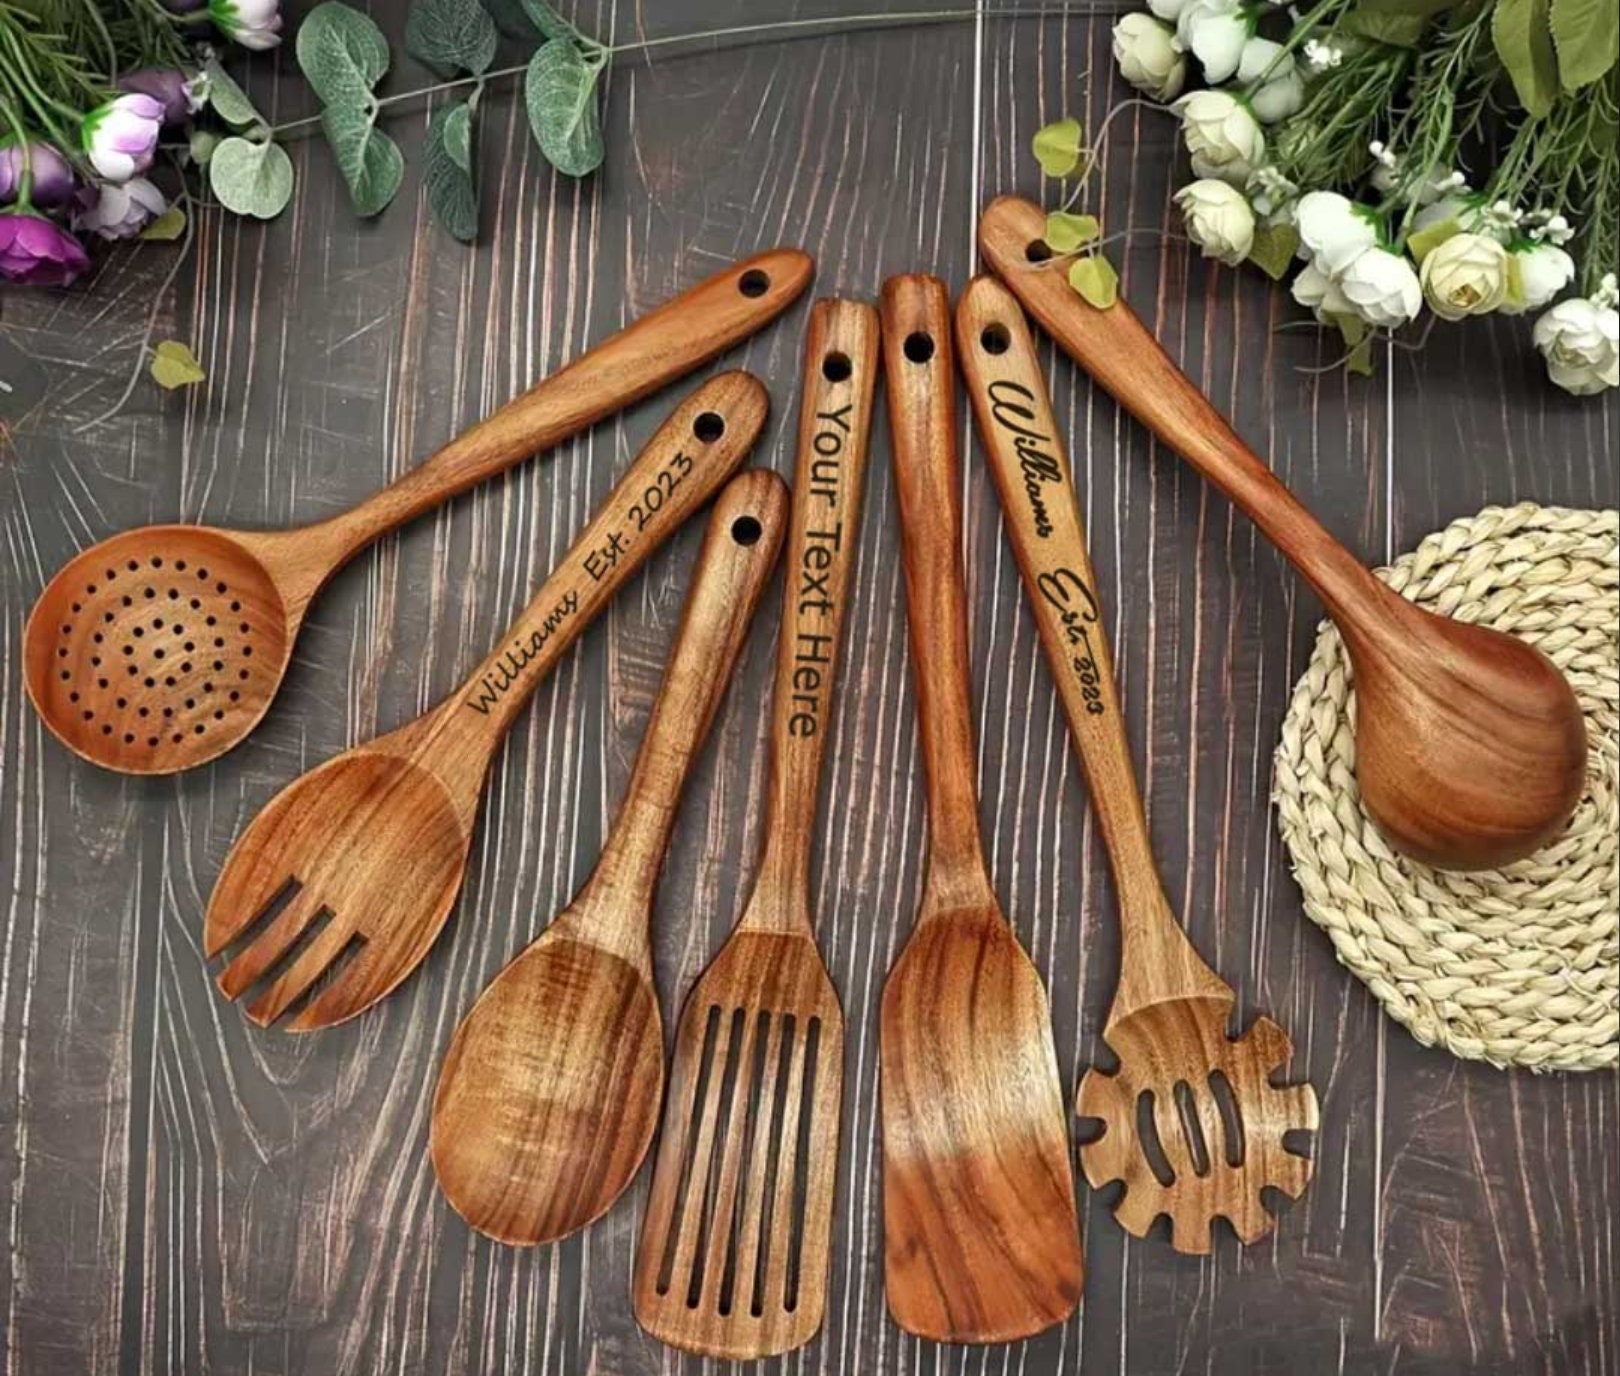 5pcs, Bamboo Ladles, Wooden Spoons Utensils, Bamboo Cooking Utensils Carve  Burned Wooden Spoon, Slotted Spatulas, Funny Kitchen Gadgets Non-stick Cook